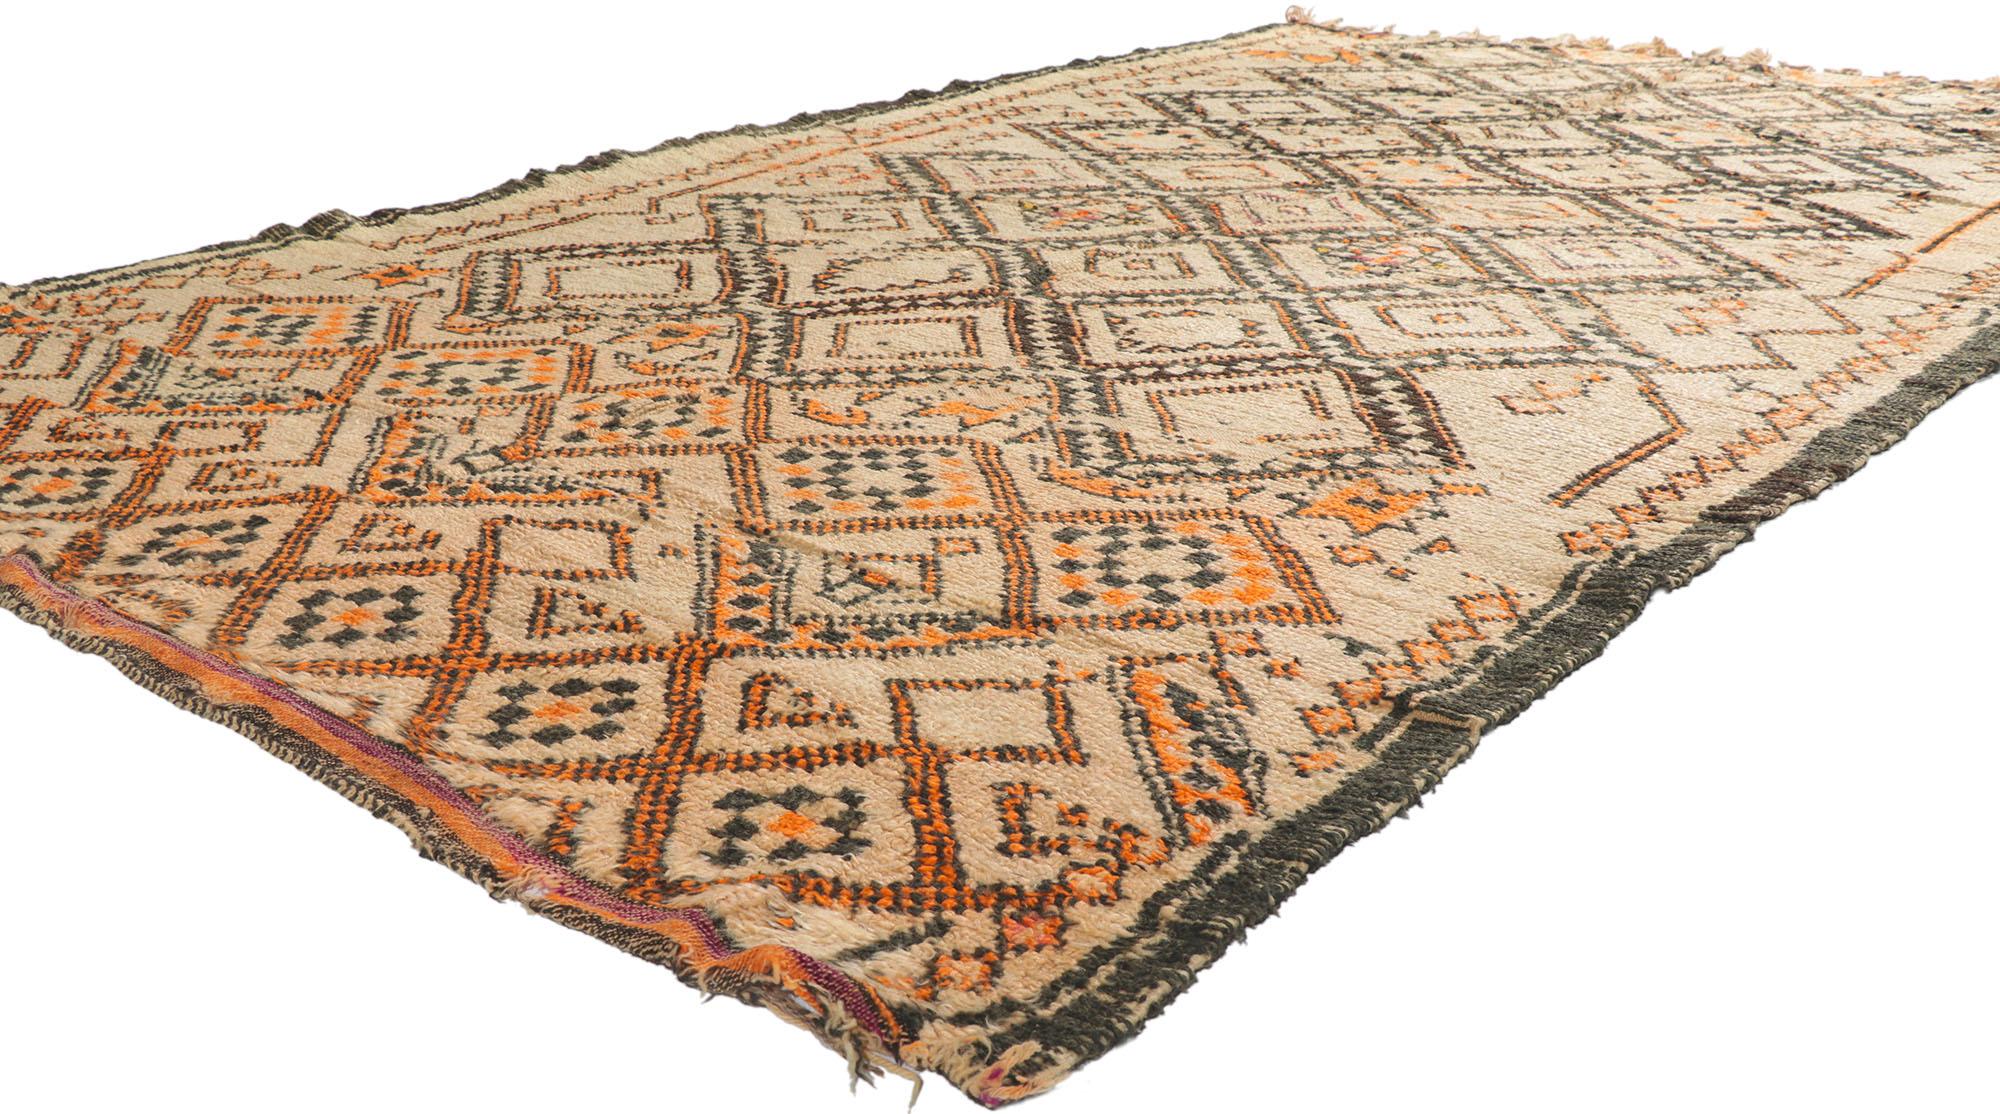 21367 Distressed Vintage Moroccan Beni Ourain Rug, 06'02 x 10'02.
With its simplicity, plush pile and tribal style, this hand knotted wool vintage Berber Beni Ourain Moroccan rug is a captivating vision of woven beauty. the lovingly time-worn field